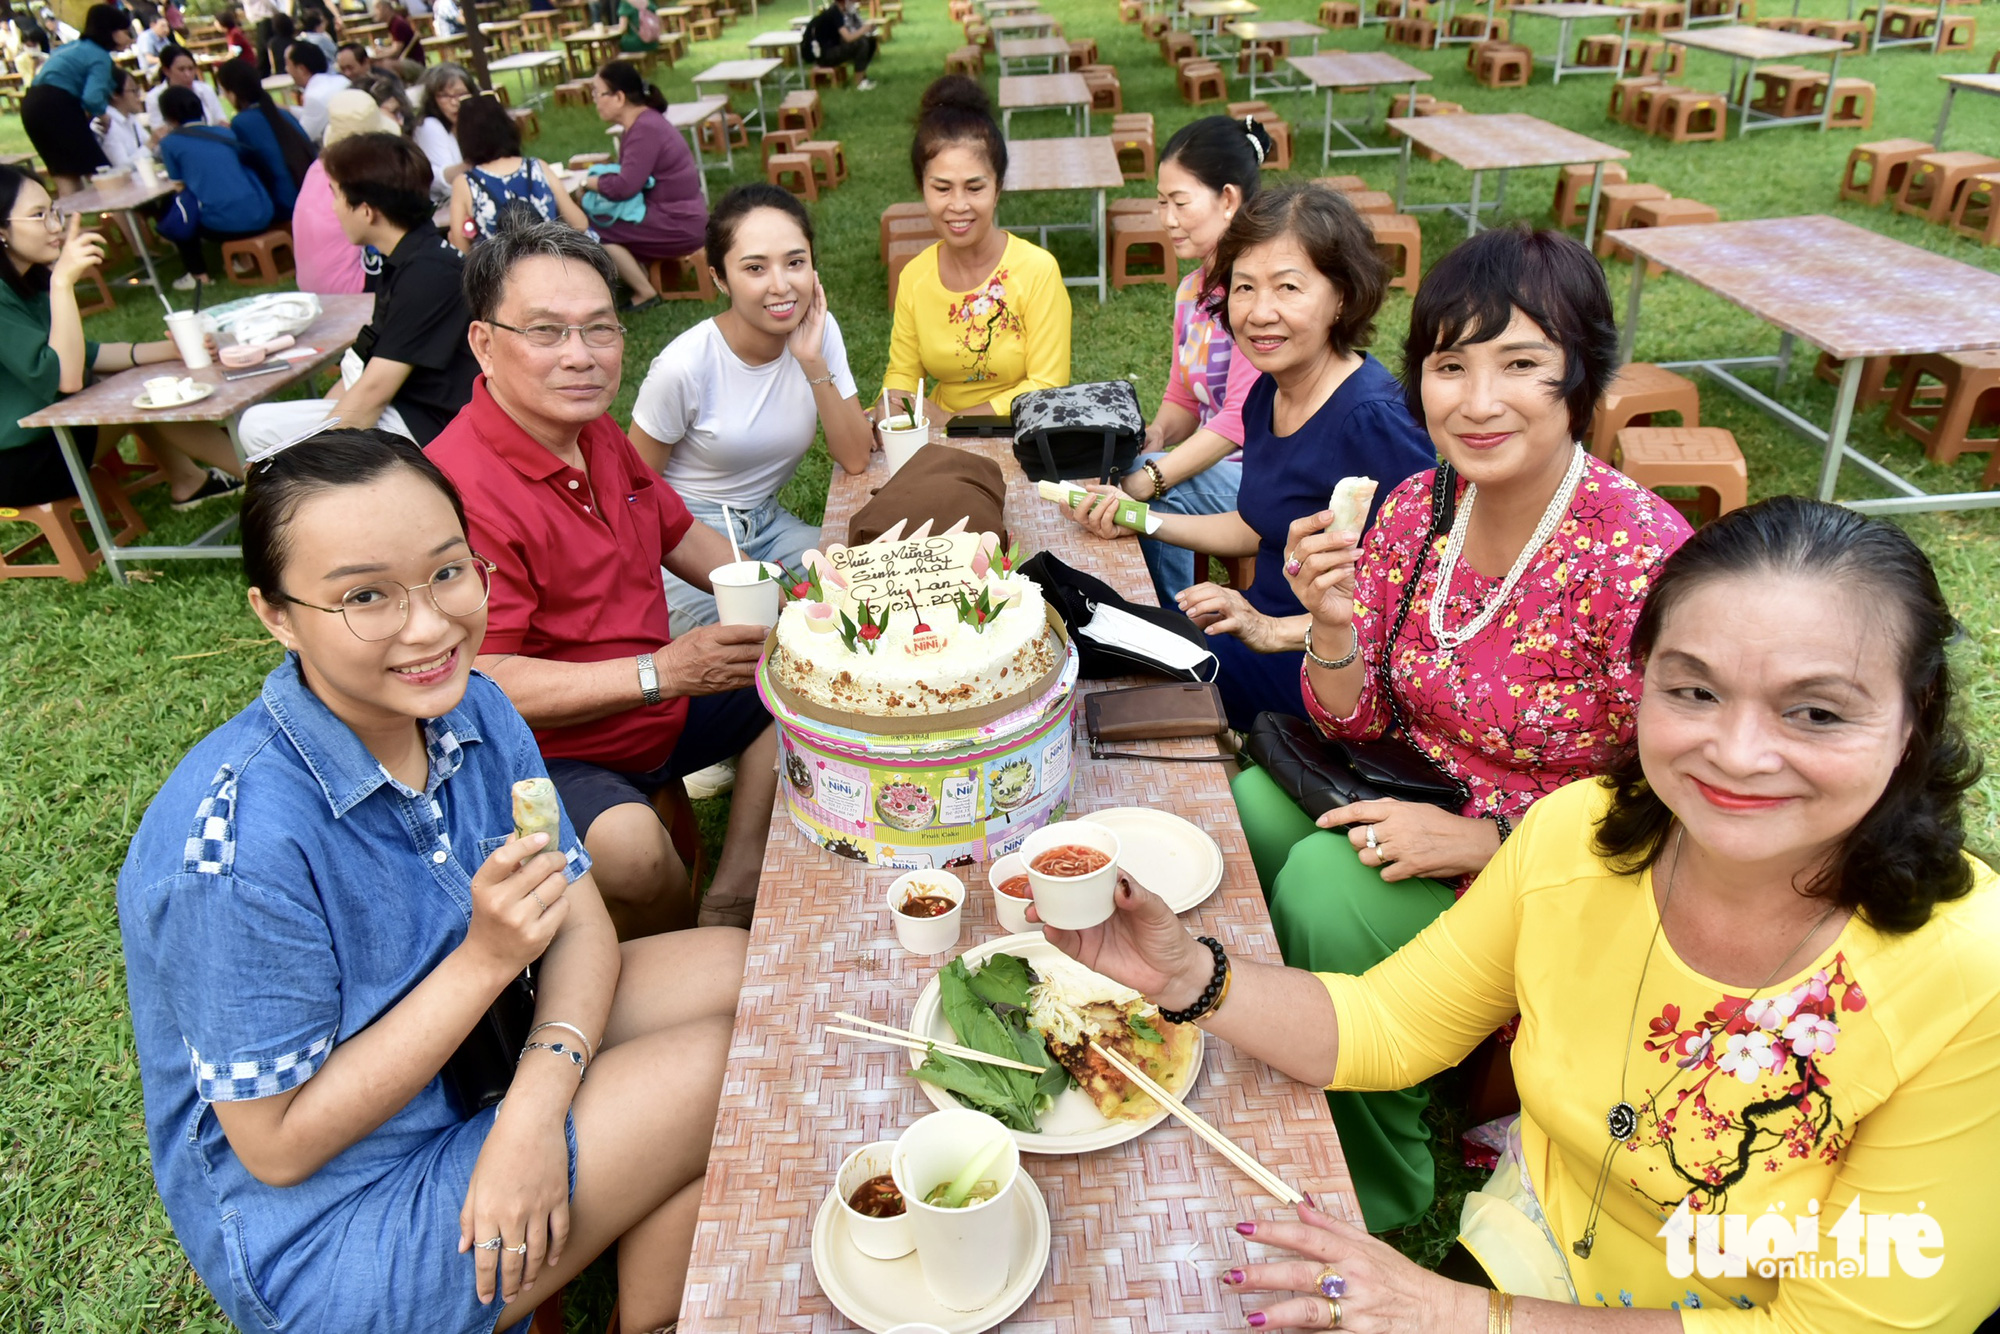 Visitors try food at the opening of the Saigontourist Group Food and Culture Festival 2023 at Van Thanh Tourist Site in Binh Thanh District, Ho Chi Minh City on April 20, 2023. Photo: T.T.D. / Tuoi Tre